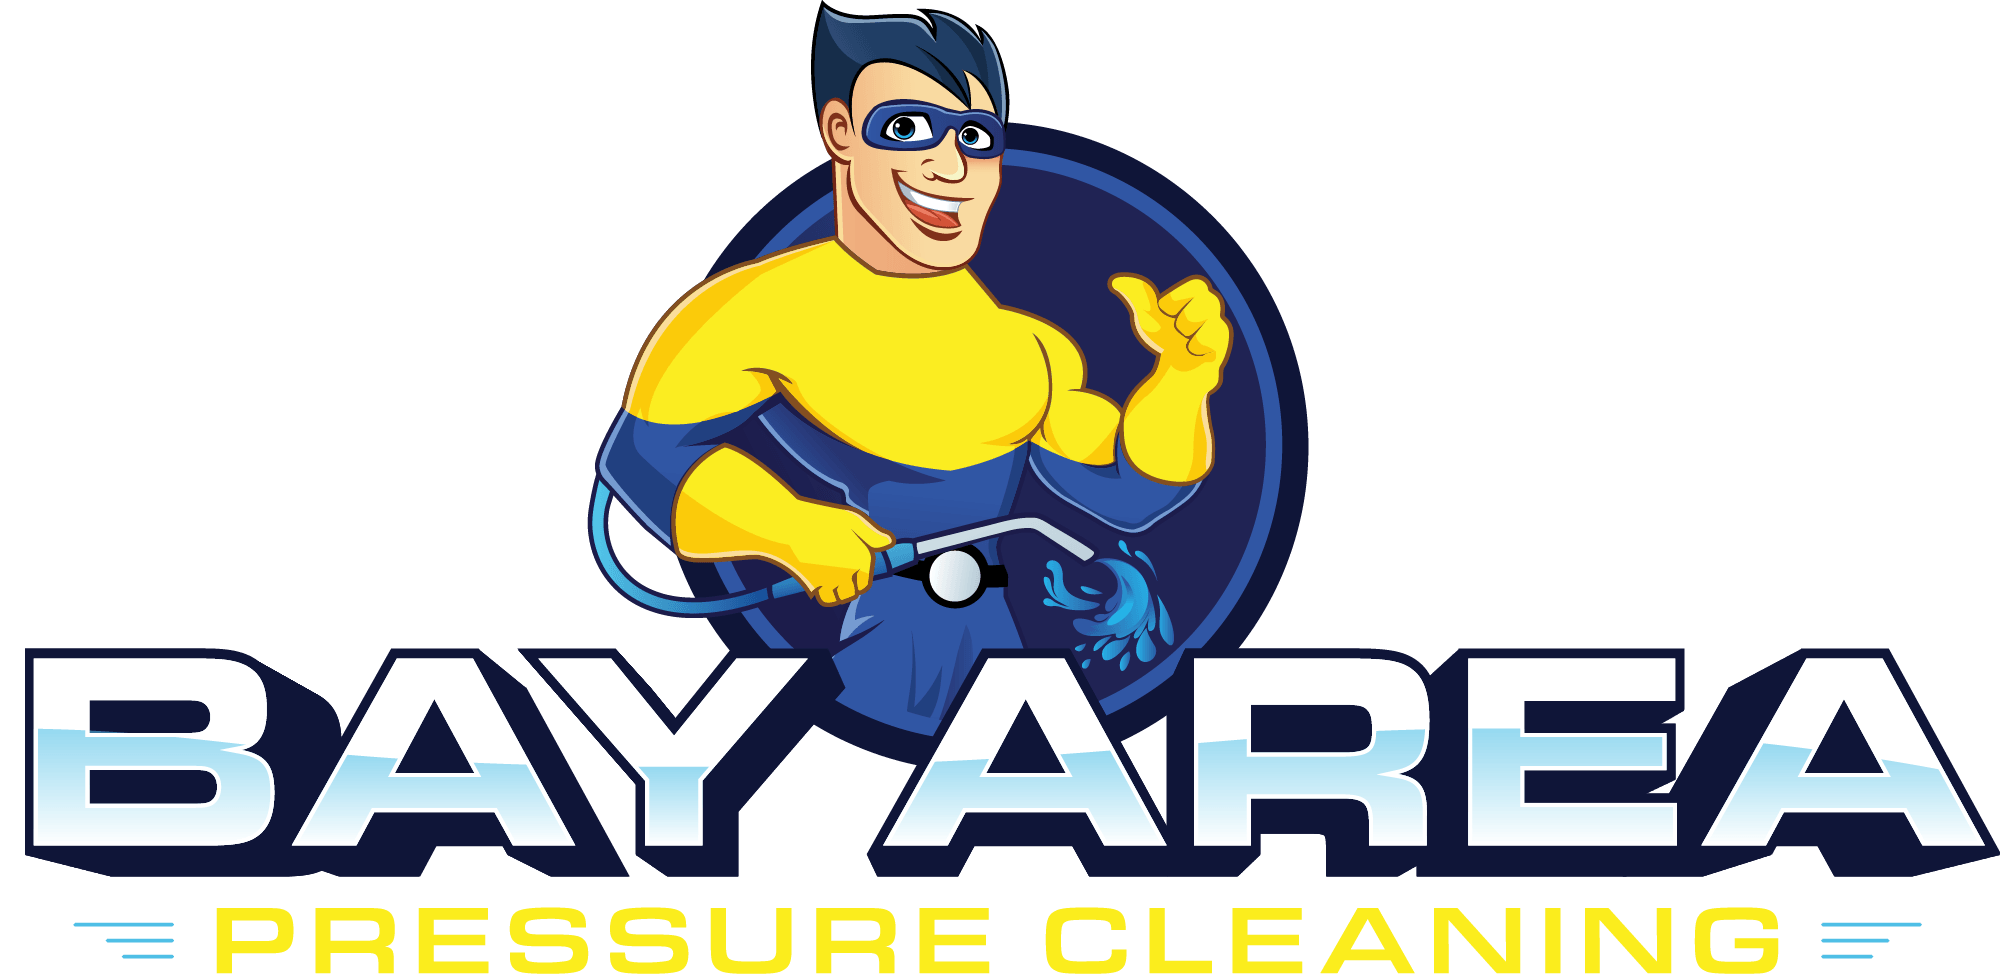 Bay Area Pressure Cleaning – Christine Stahl